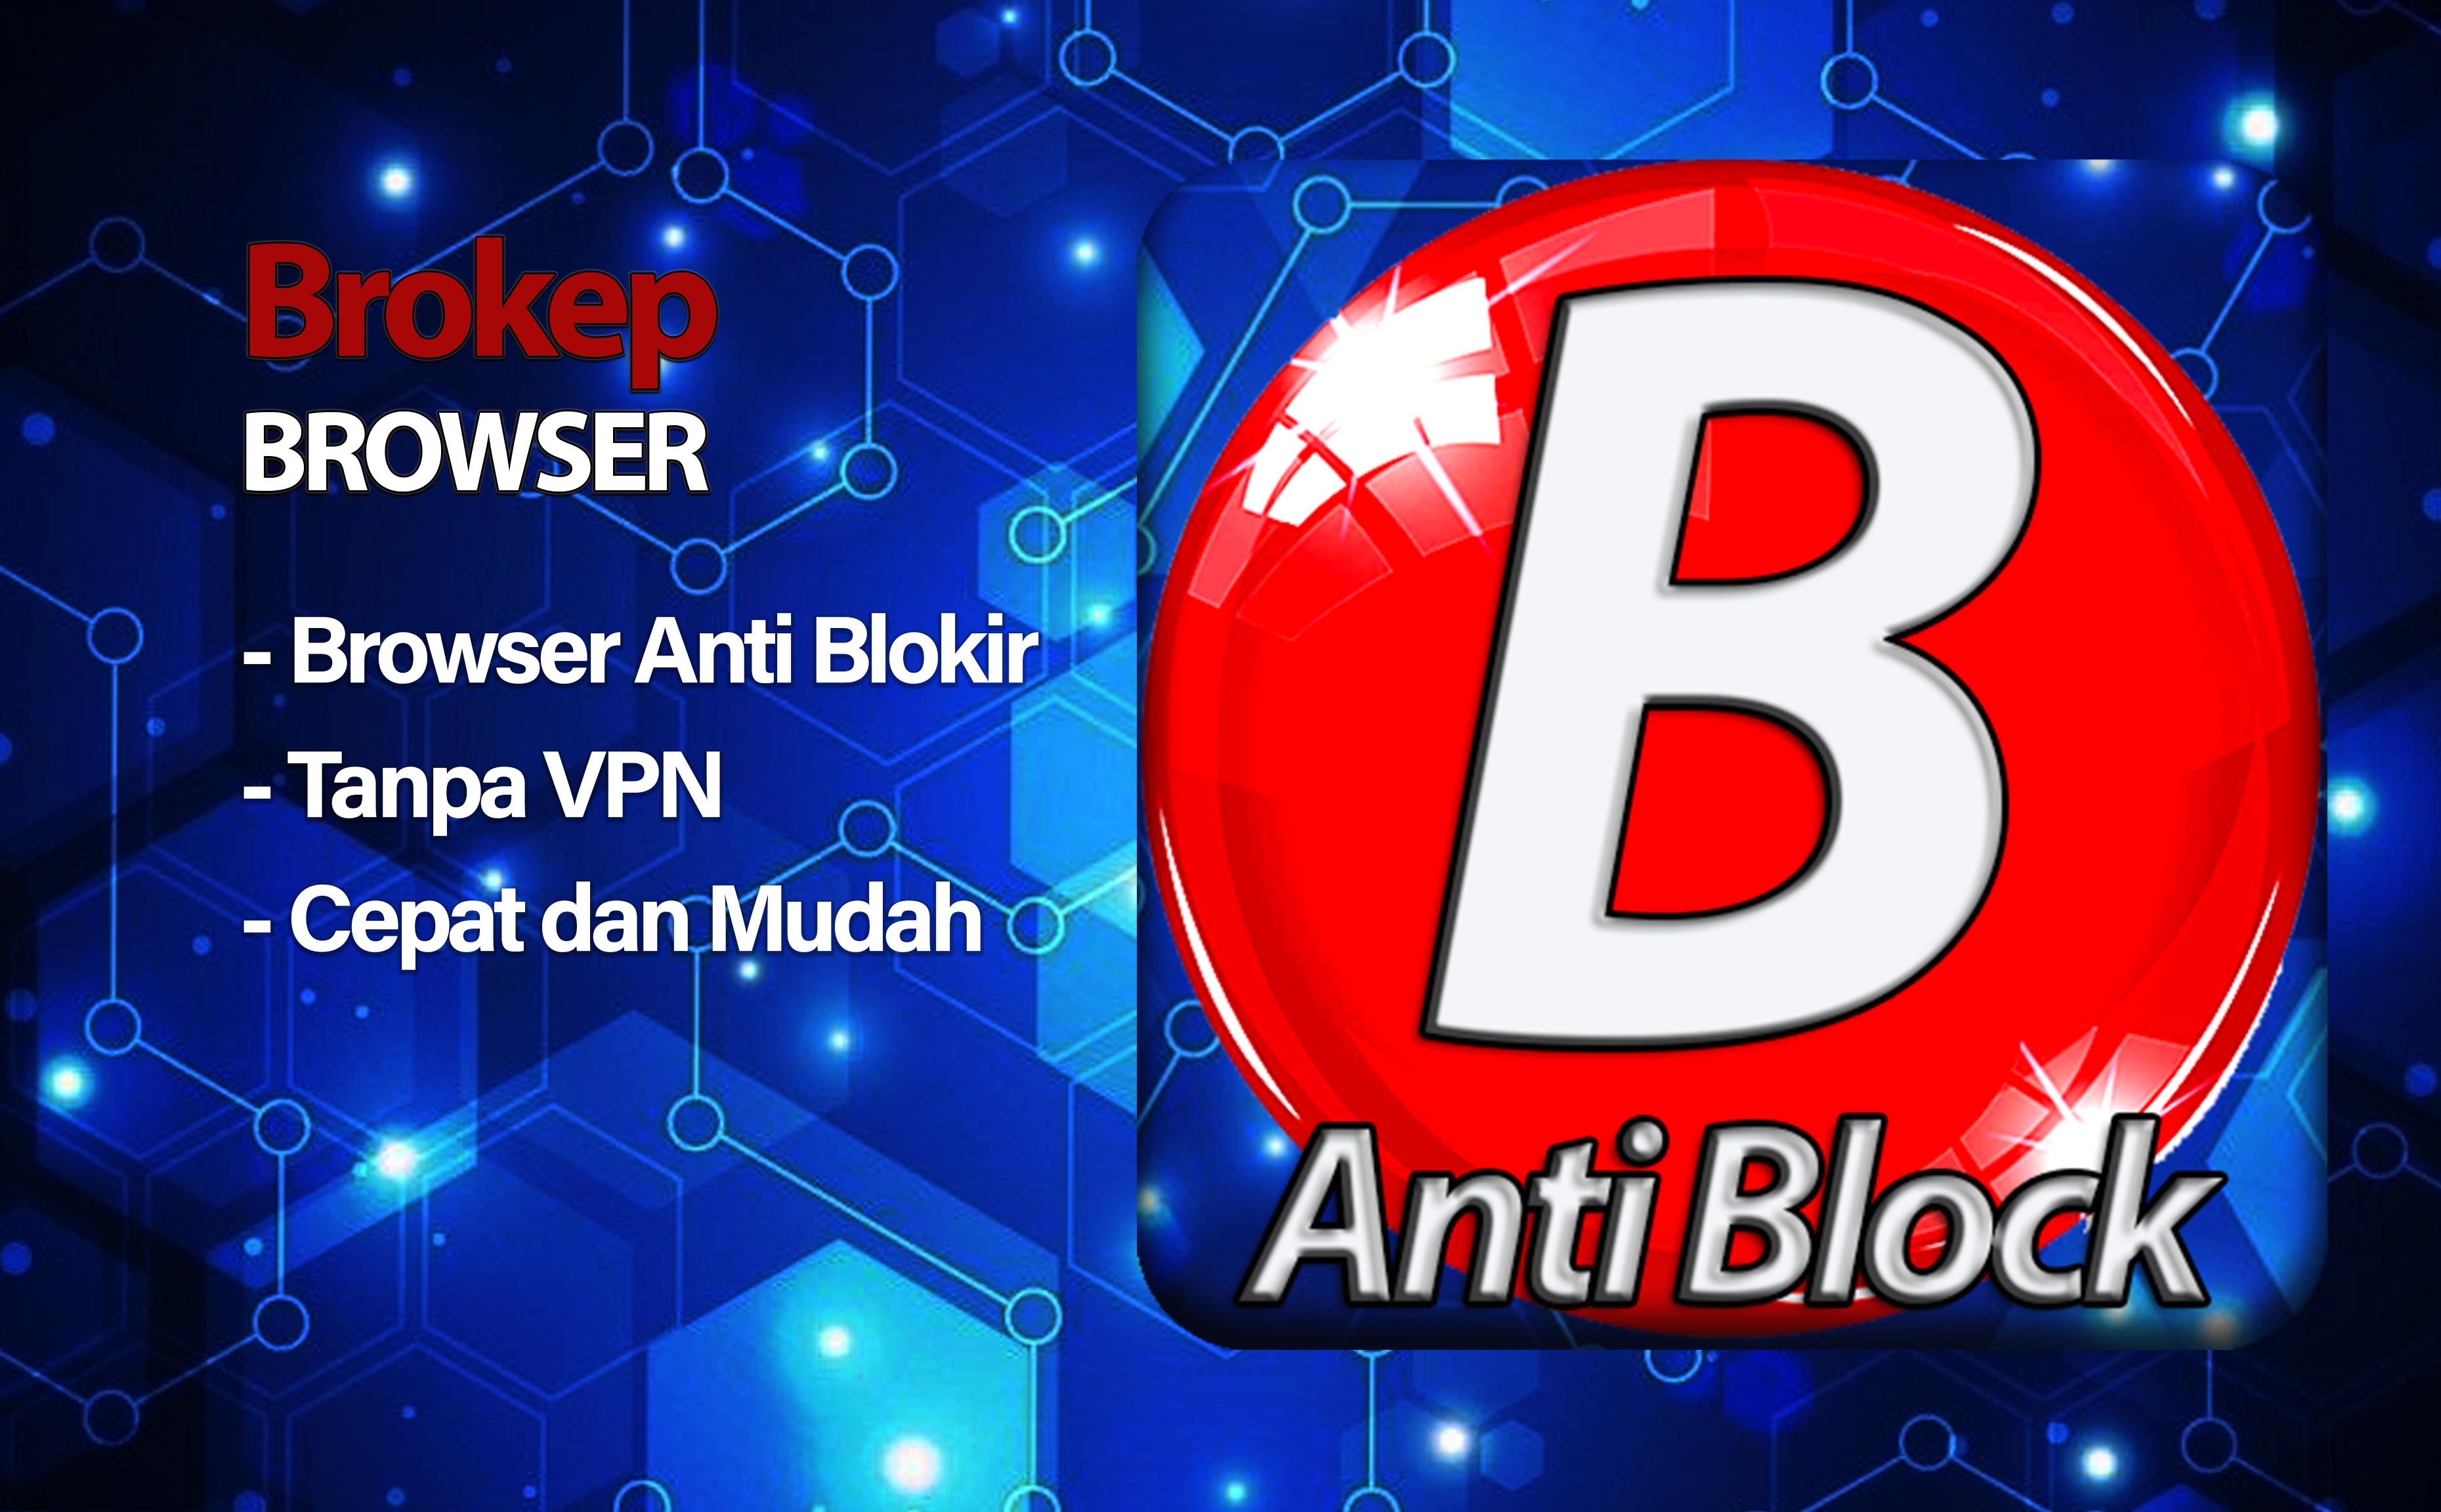 Brokep Browser Anti Blokir - Proxy Browser for Android - APK Download